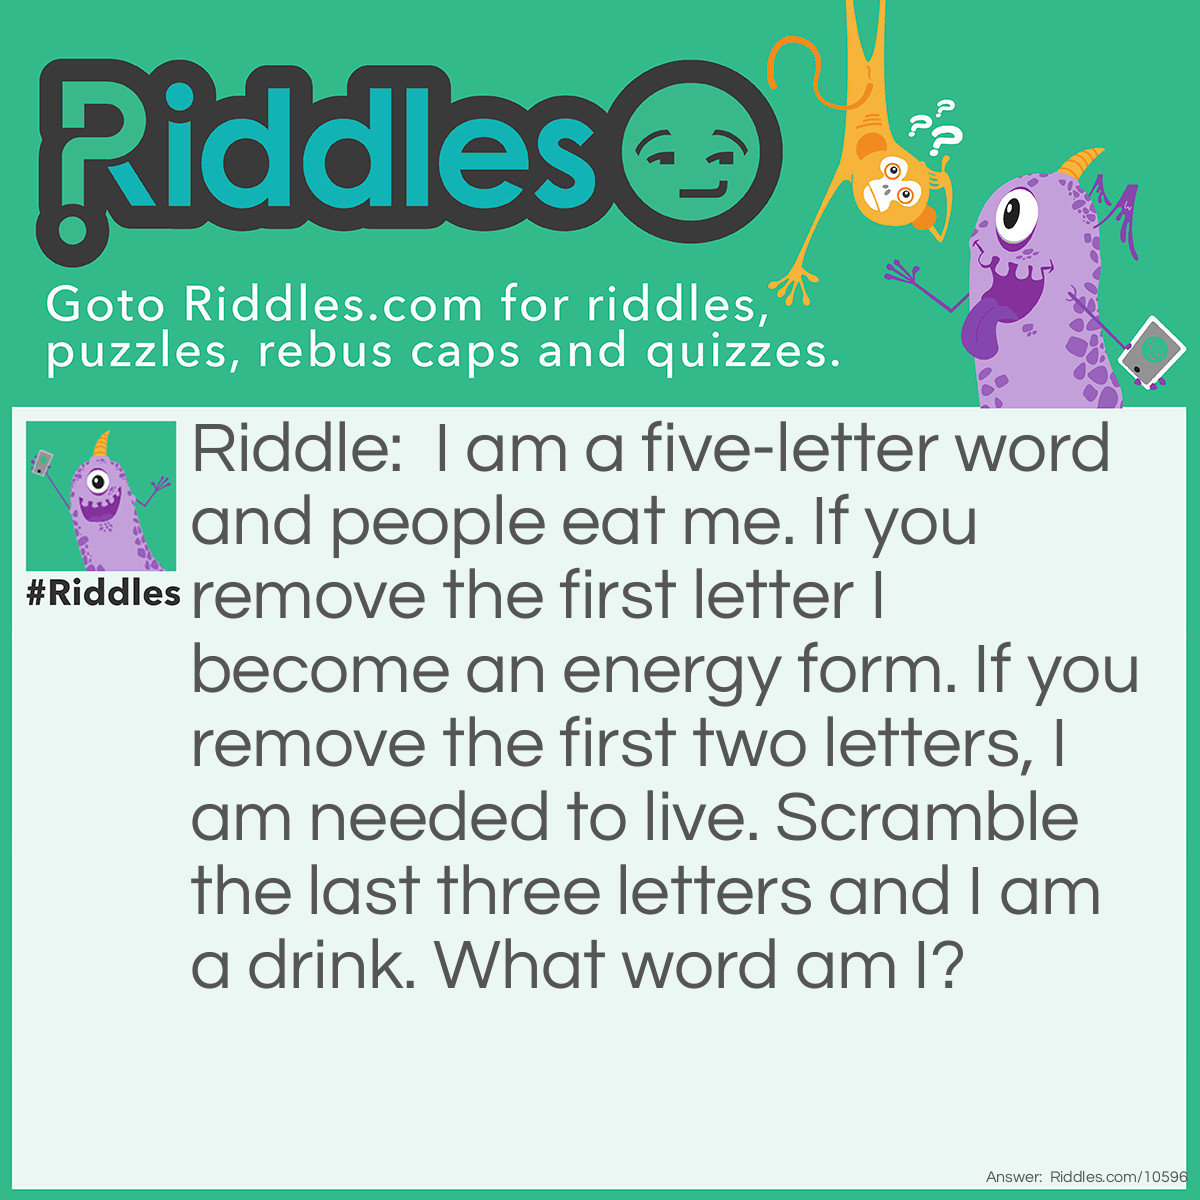 Riddle: I am a five-letter word and people eat me. If you remove the first letter I become an energy form. If you remove the first two letters, I am needed to live. Scramble the last three letters and I am a drink. What word am I? Answer: Wheat (heat, eat, tea).